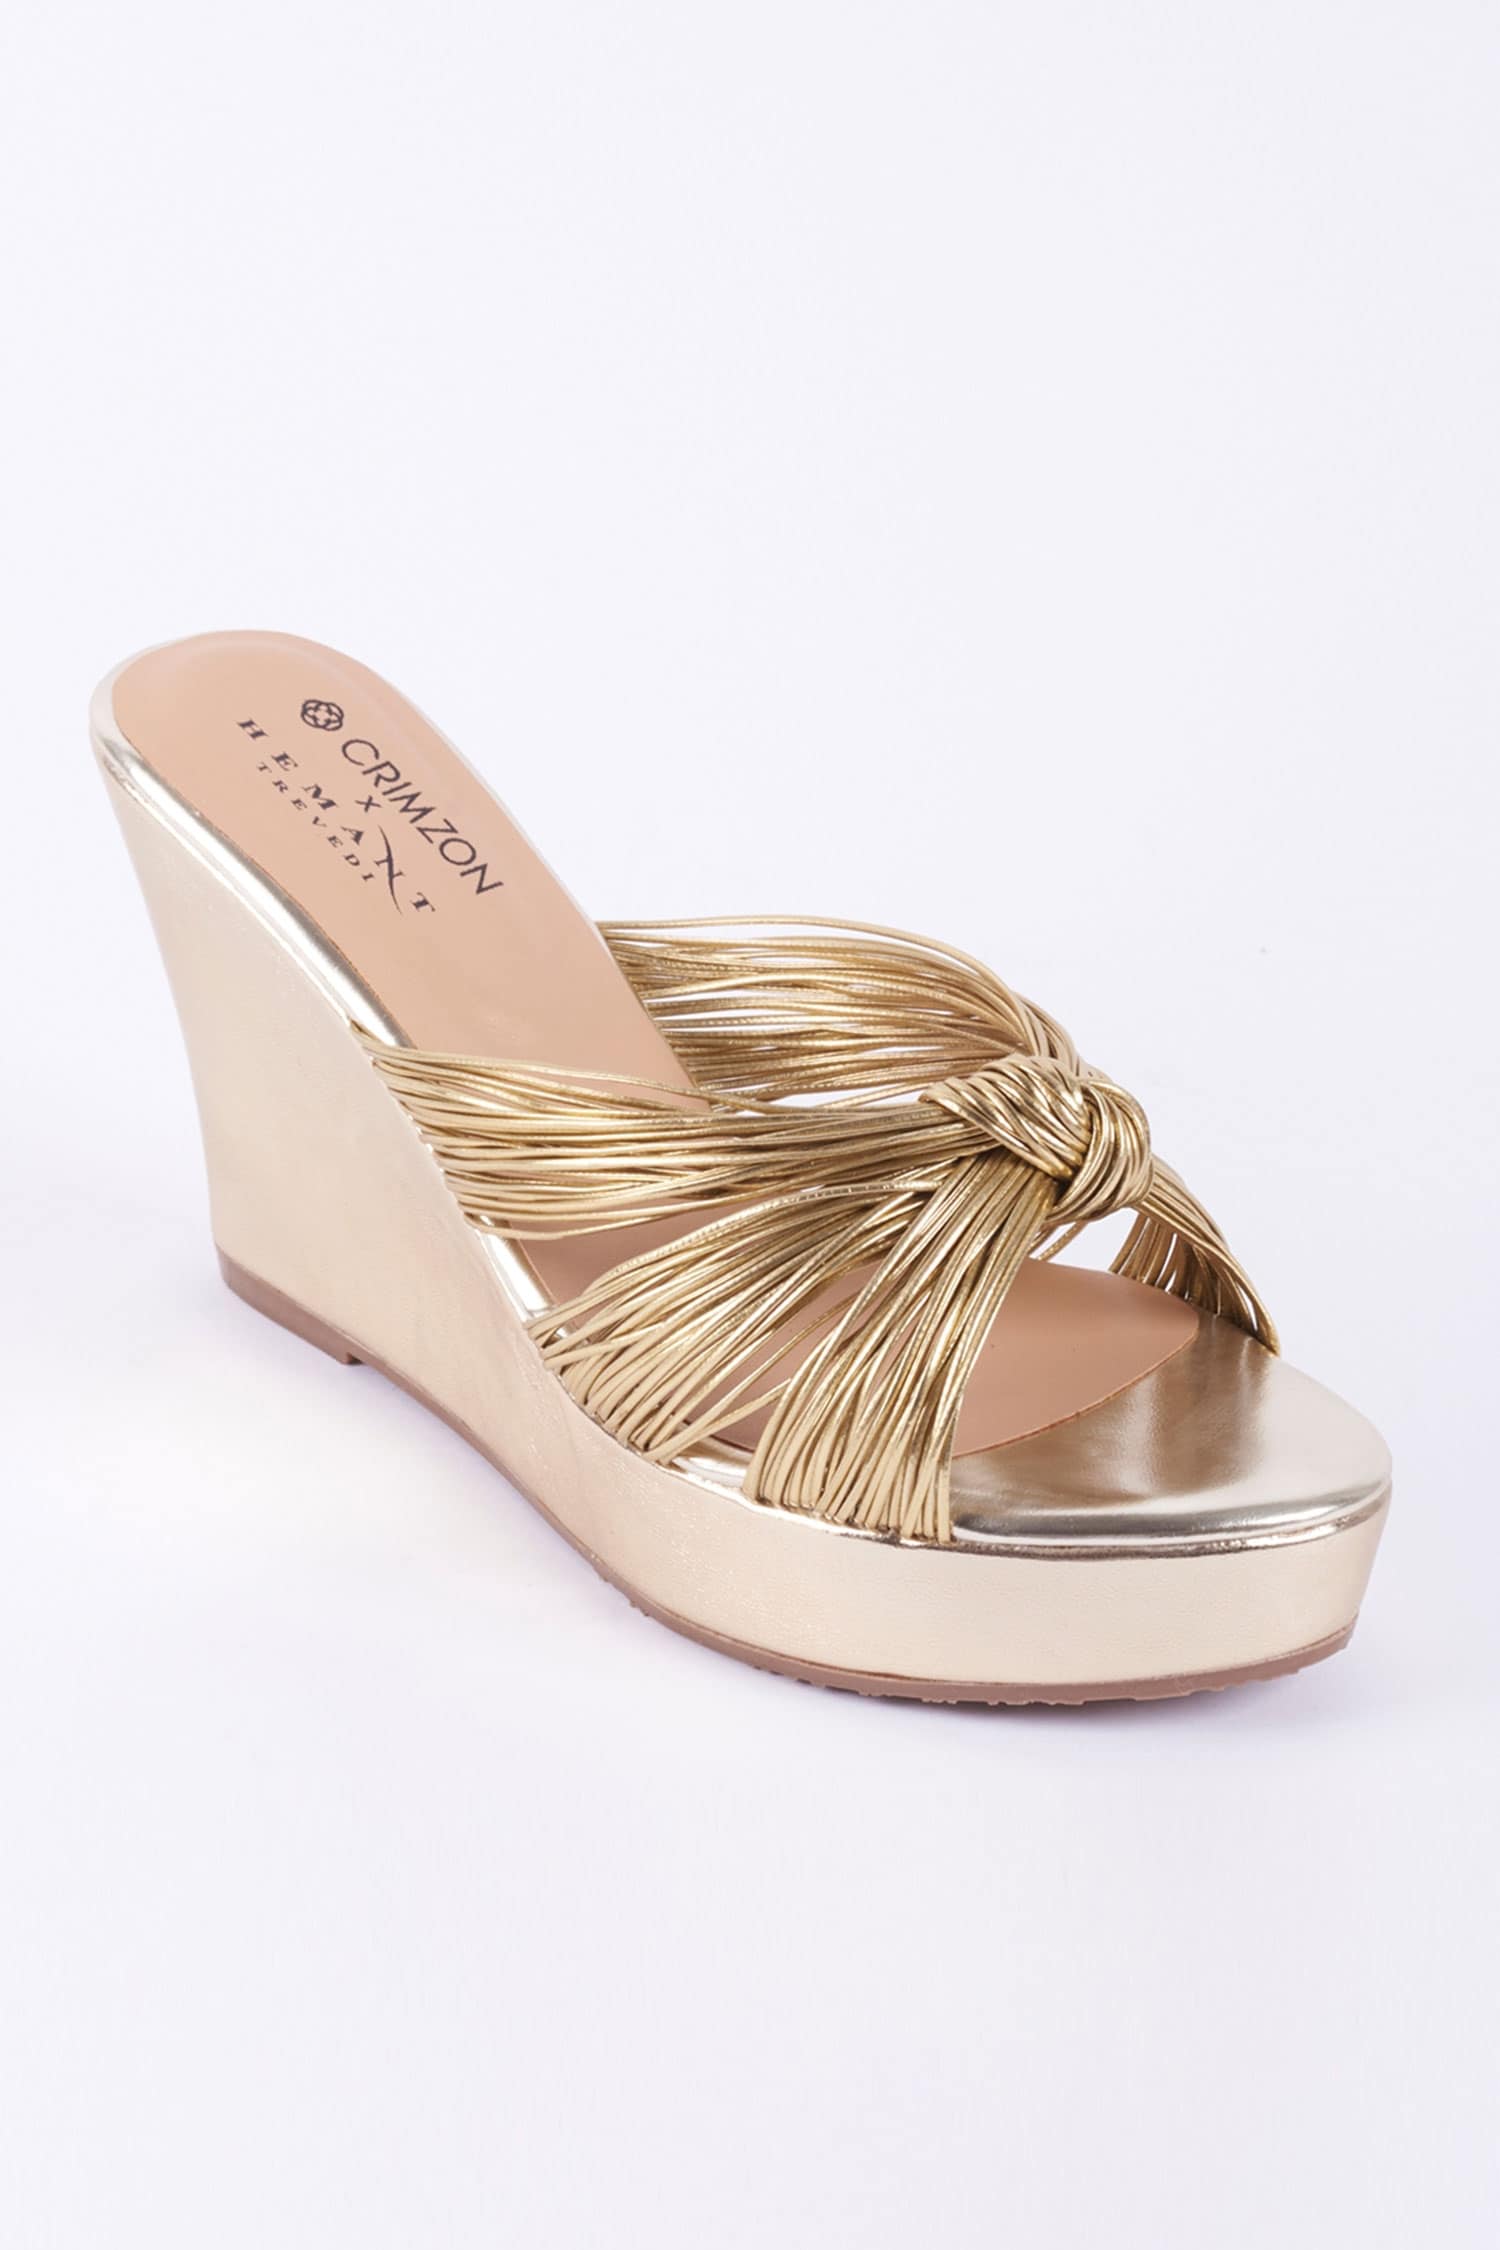 Buy Gold Embroidered Floral Wedges by Essem Online at Aza Fashions.